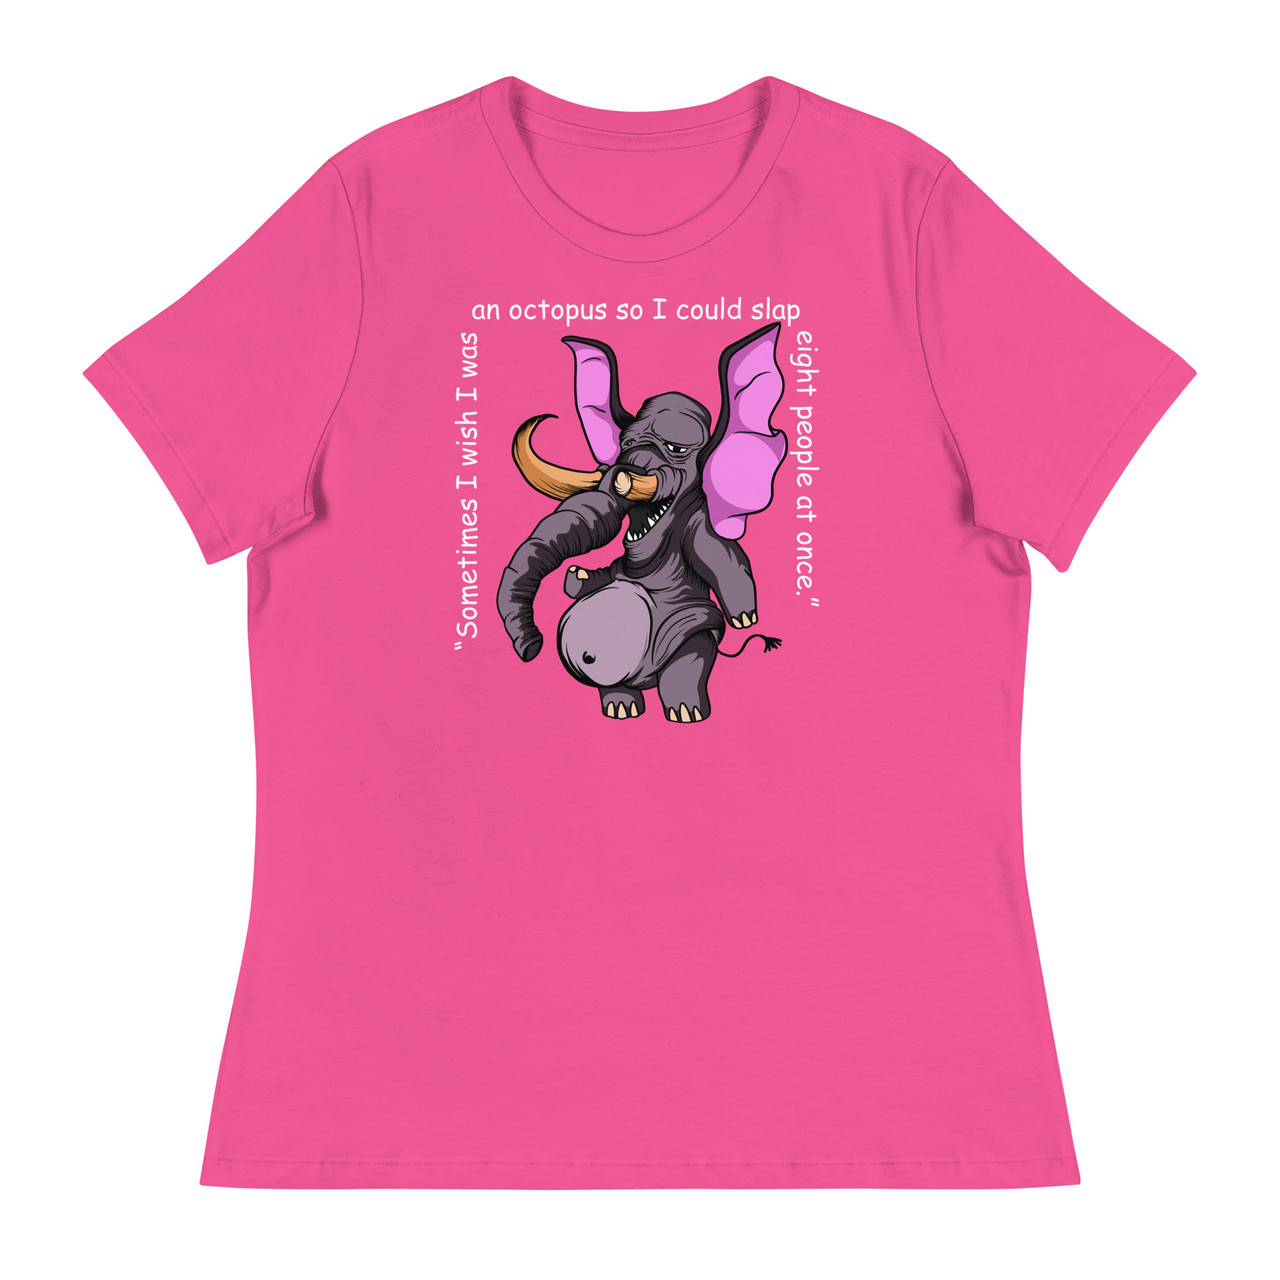 Sometimes I wish I was an octopus Women's Relaxed T-Shirt - Bella + Canvas 6400 